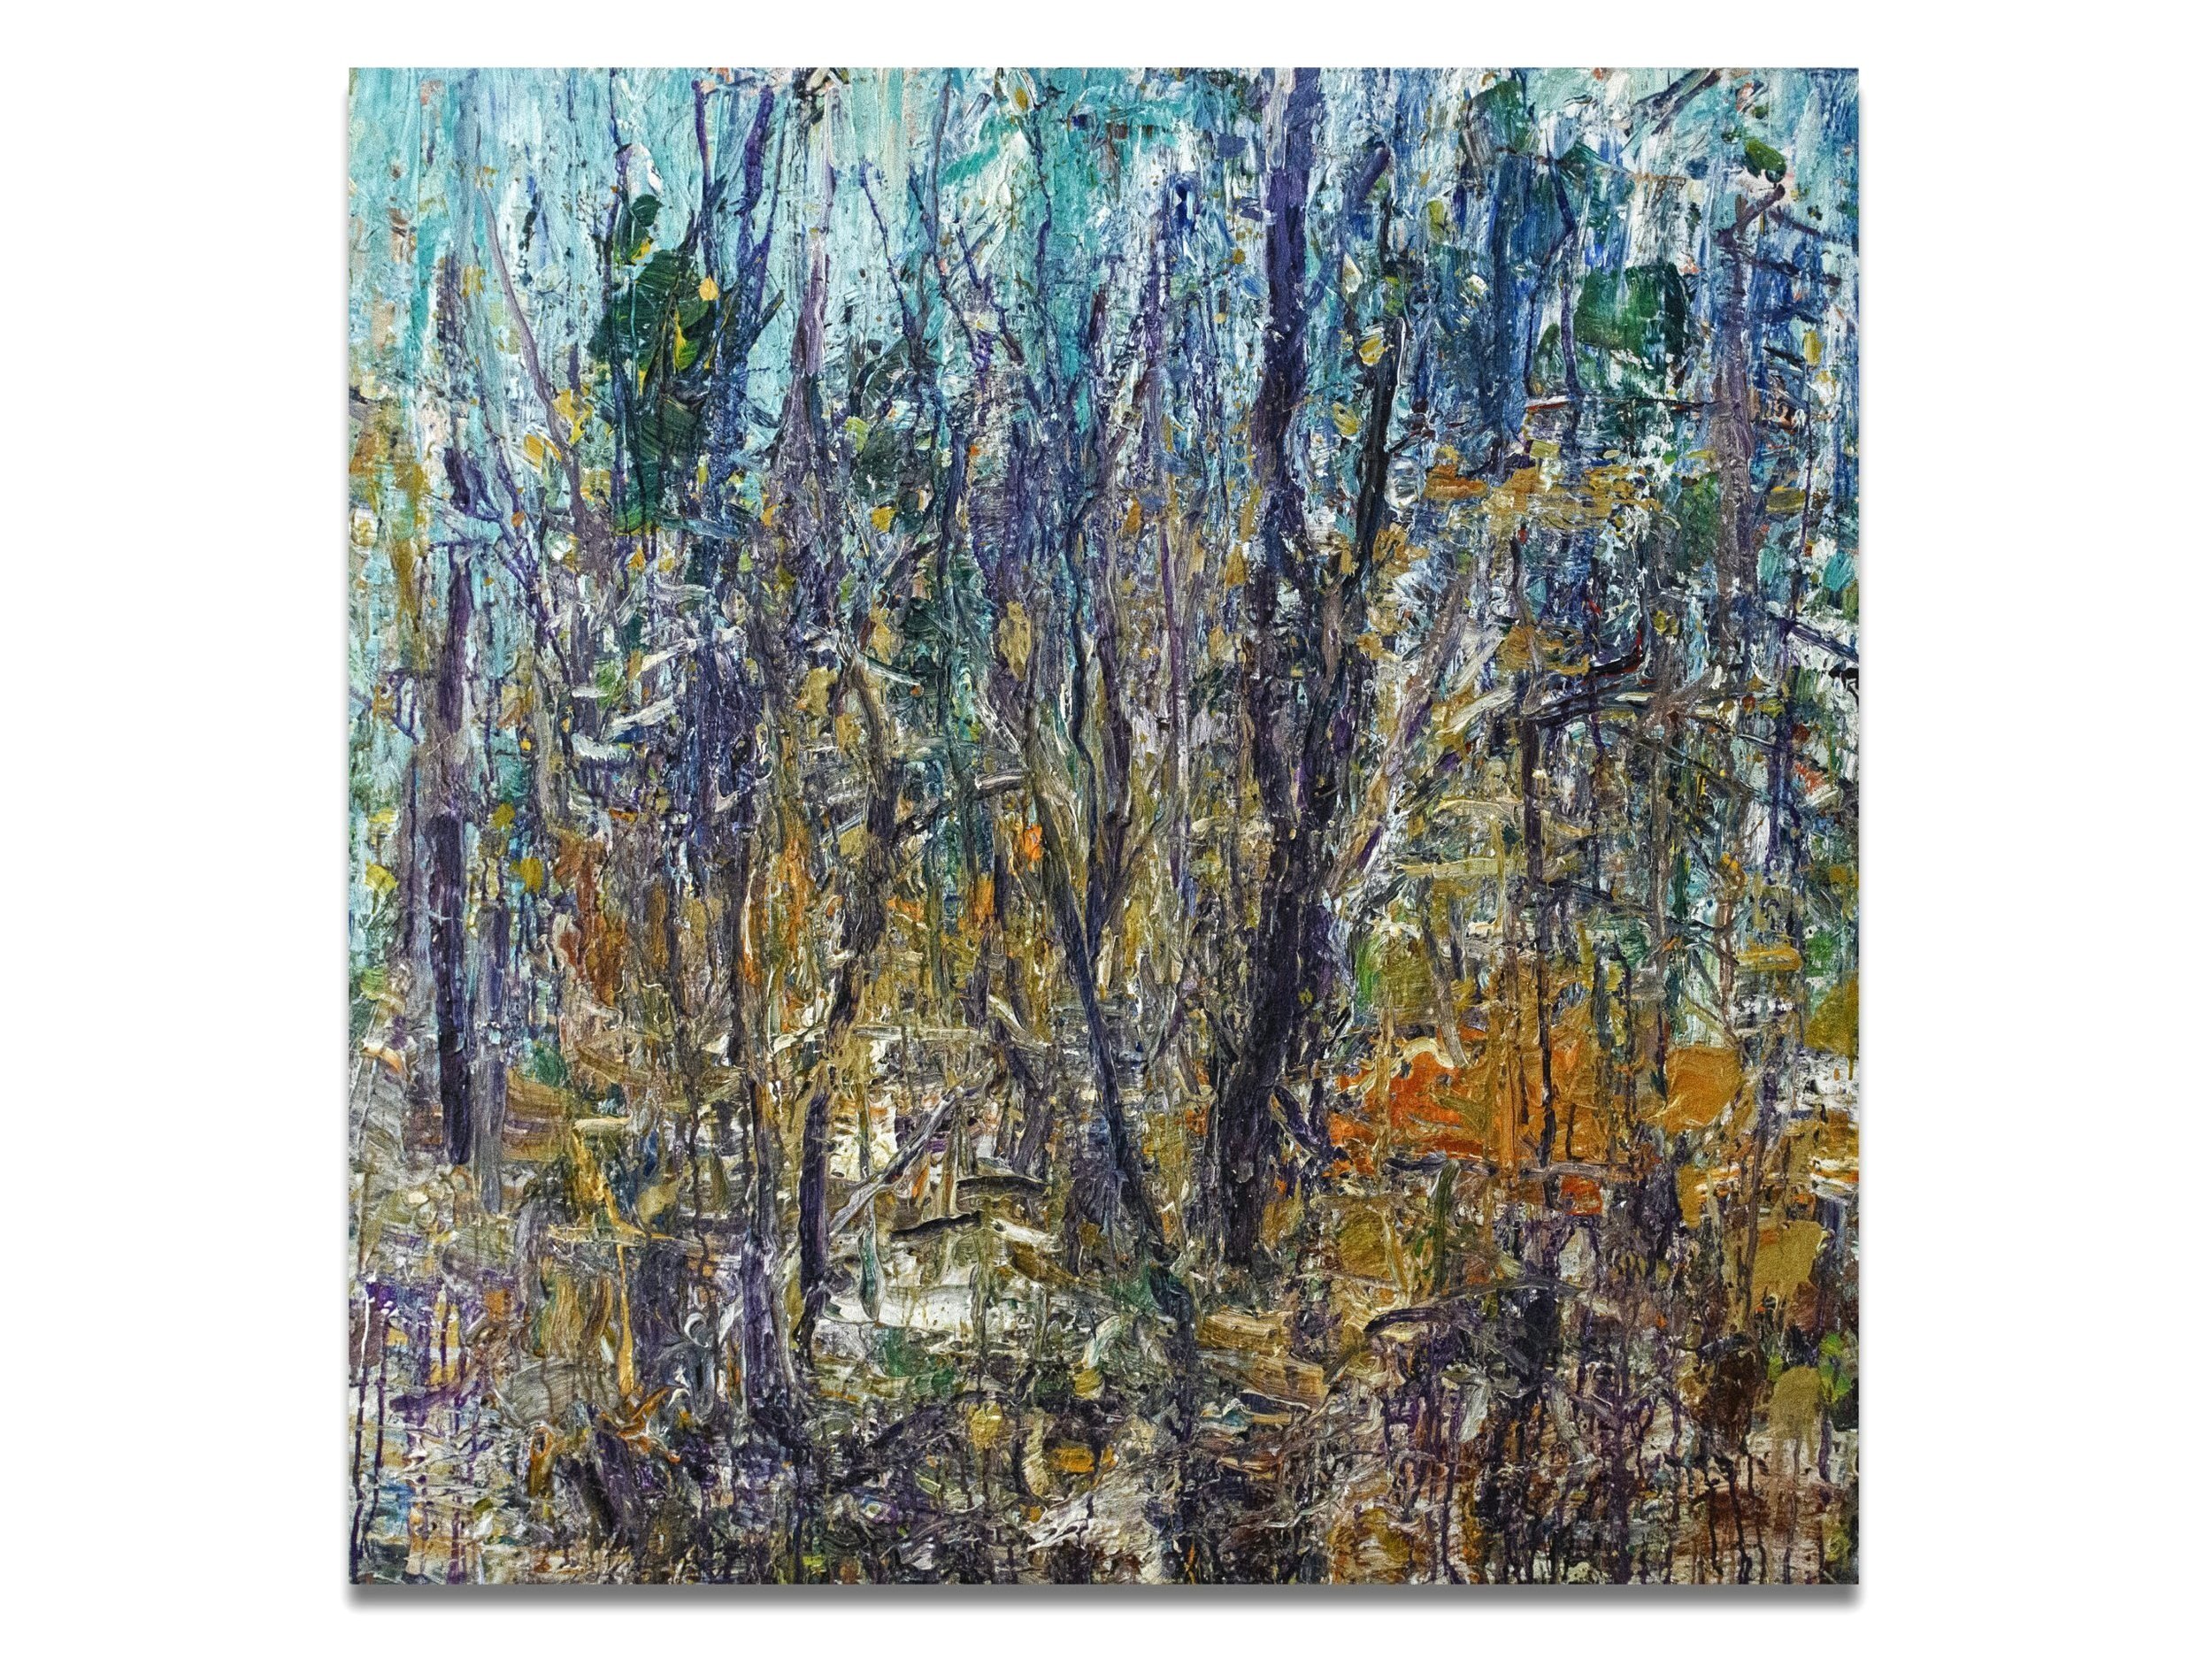    Early Spring Forest 6-04-19    2019 acrylic on canvas 48”x48” $10,000 